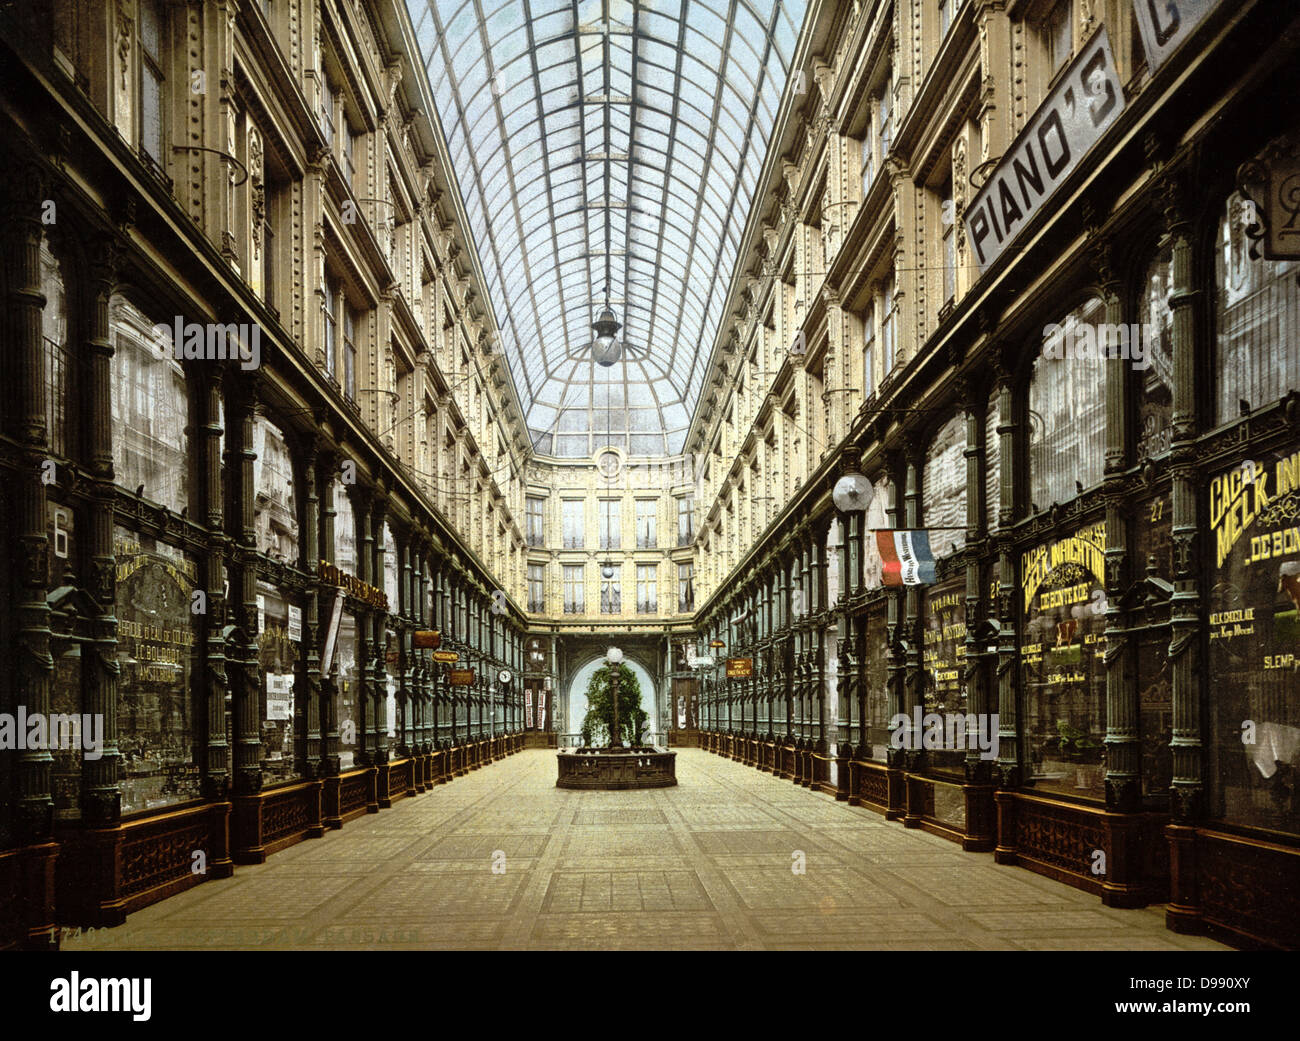 1900 shops history historical stock photography and - Alamy